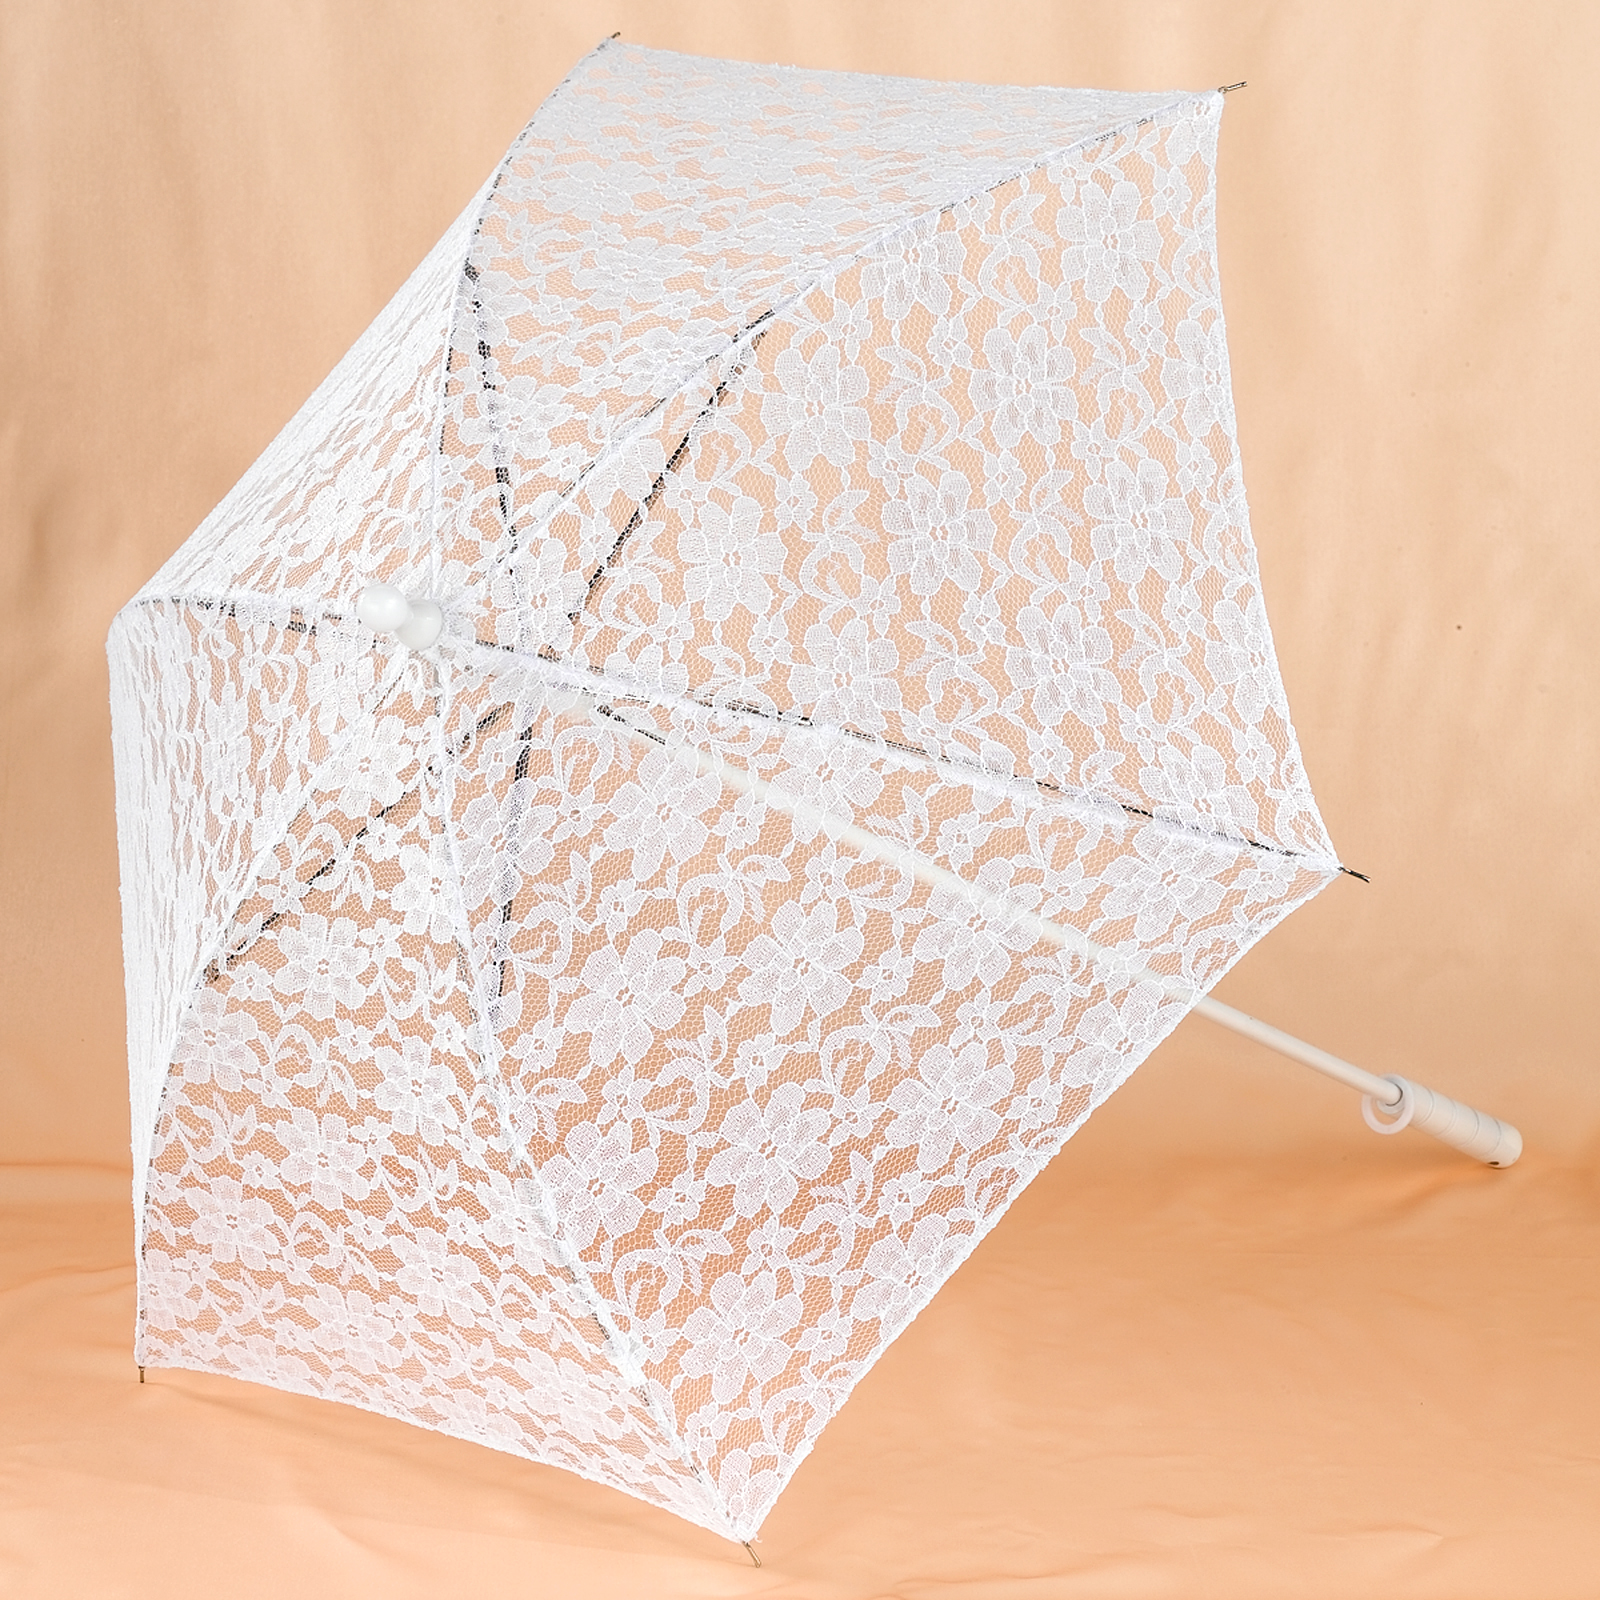 Rubie's Costume Co Women's Lace Parasol - White - One-Size